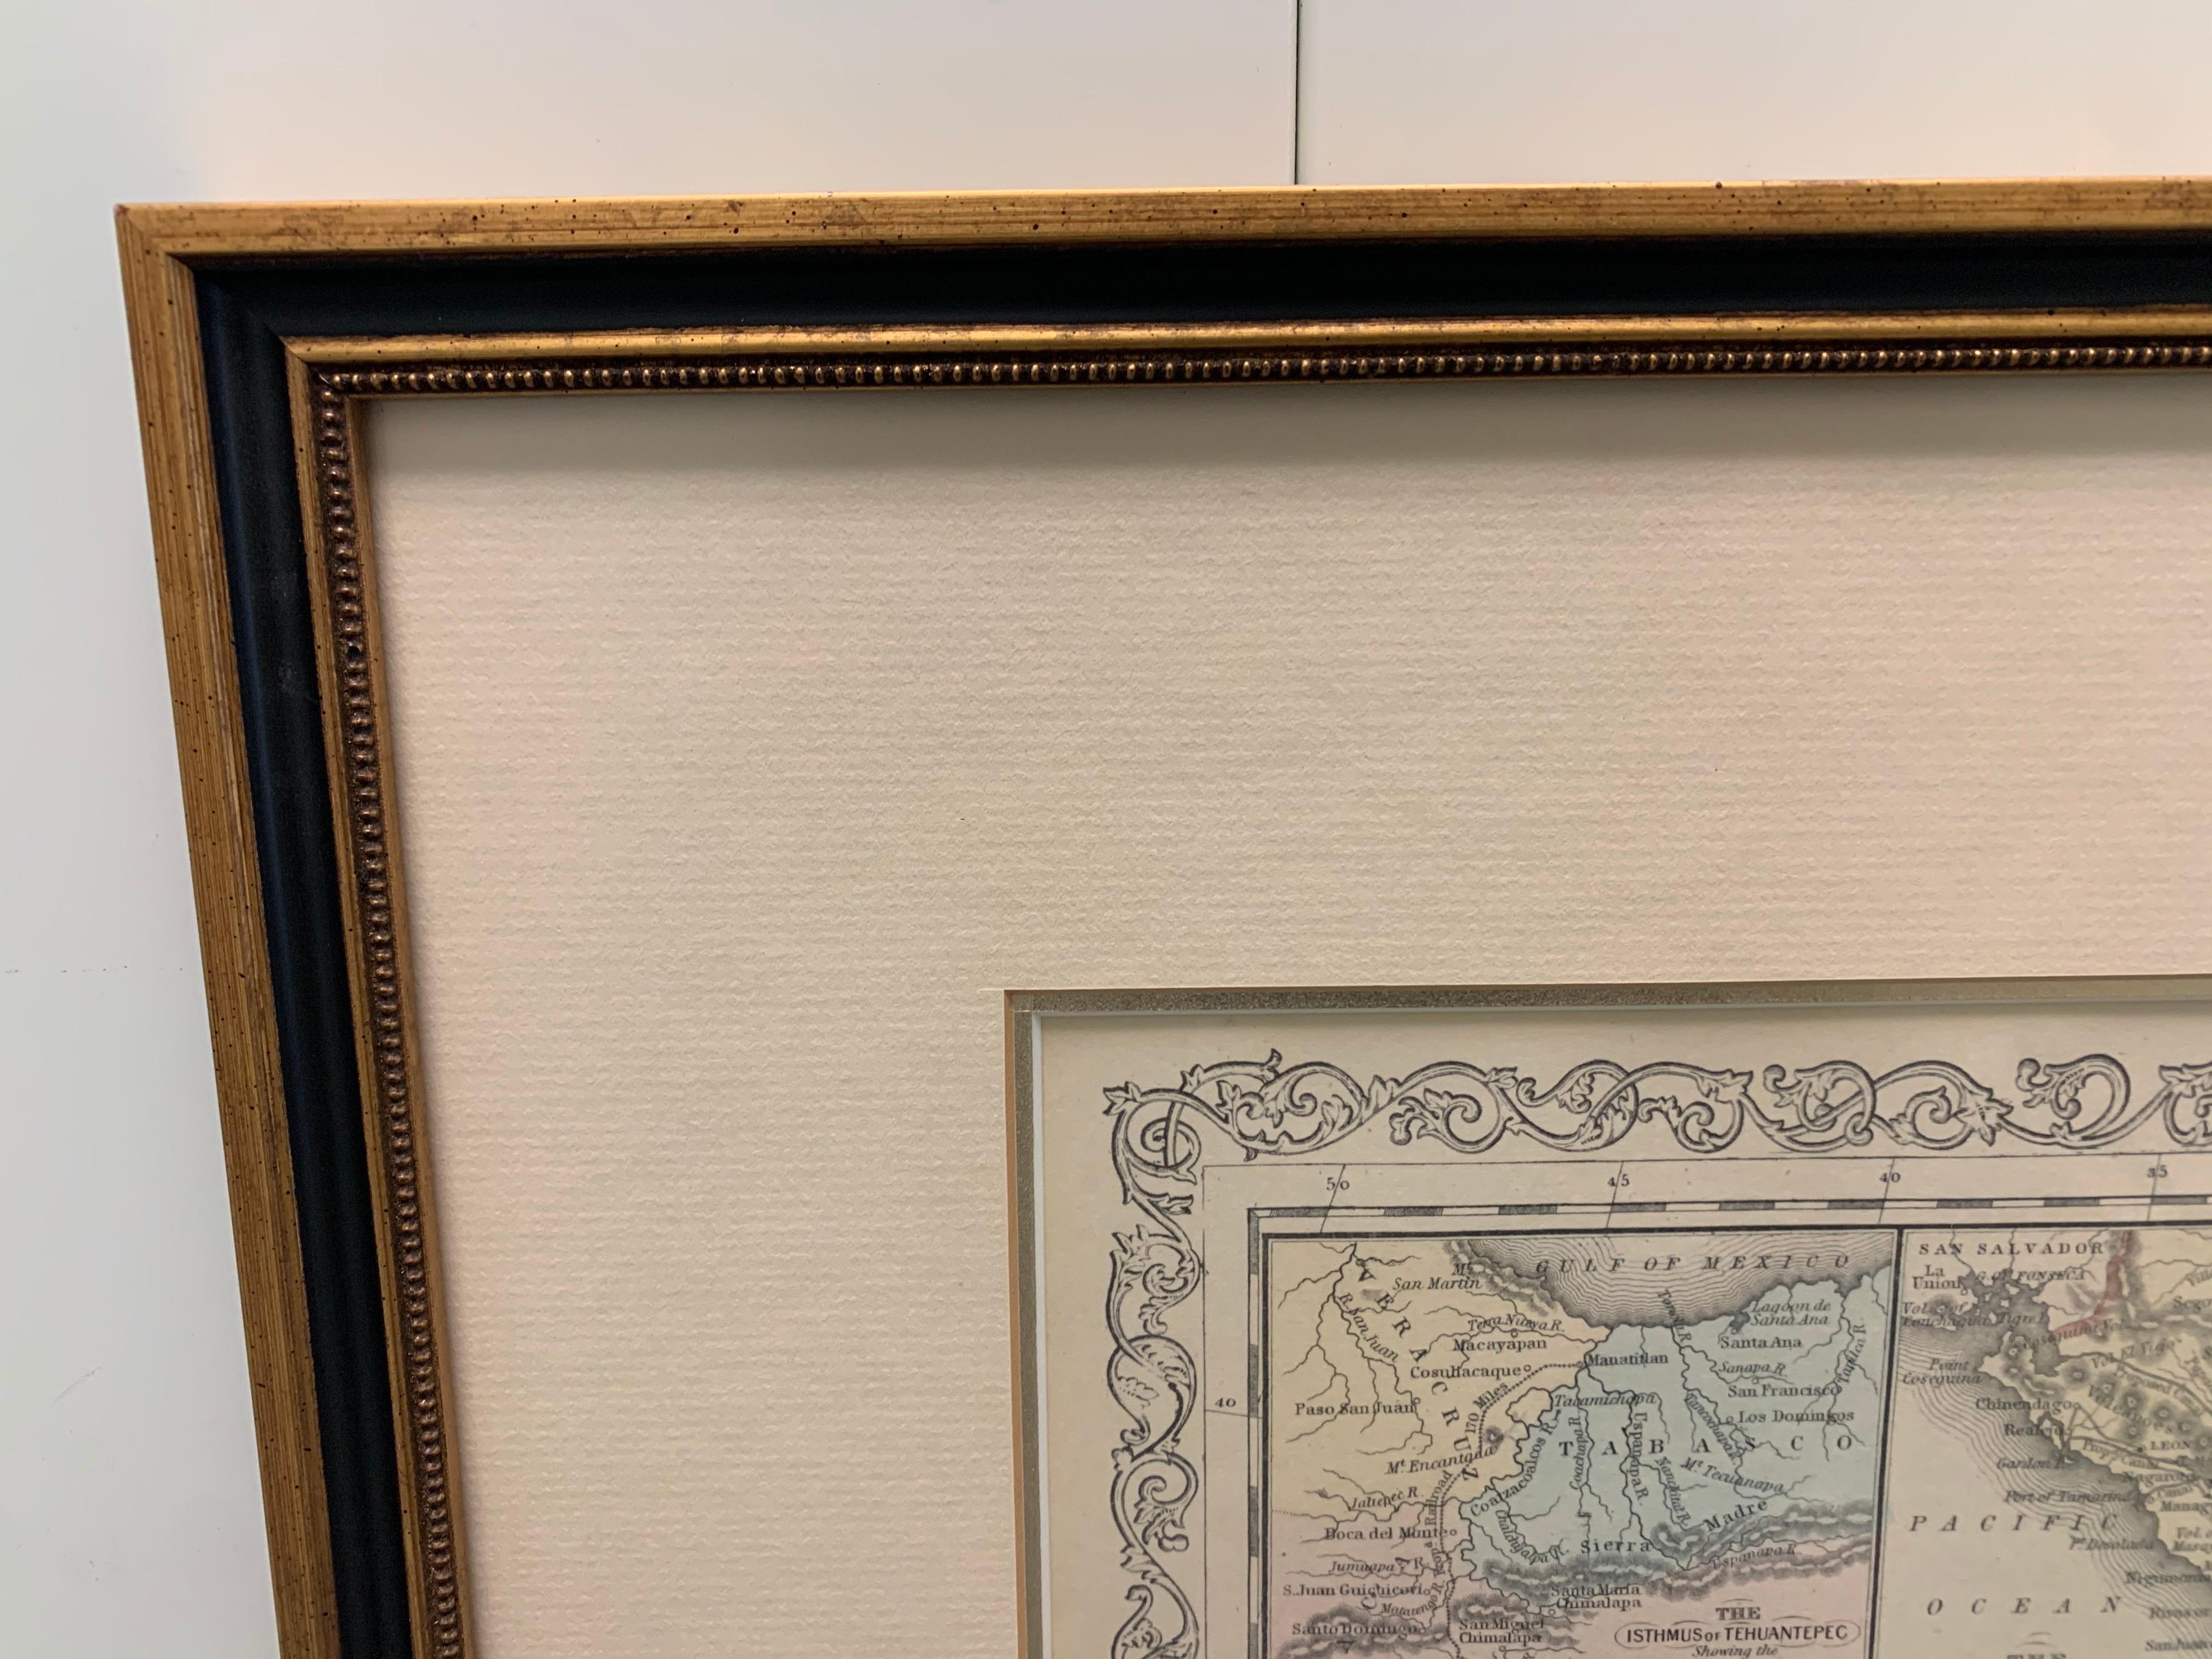 Large 1856 Mexico & Guatemala Framed map. Published by Charles Desilver, Philadelphia, Pennsylvania.
As found high end custom framing with black giltwood frame, custom matting and UV resistant glass.